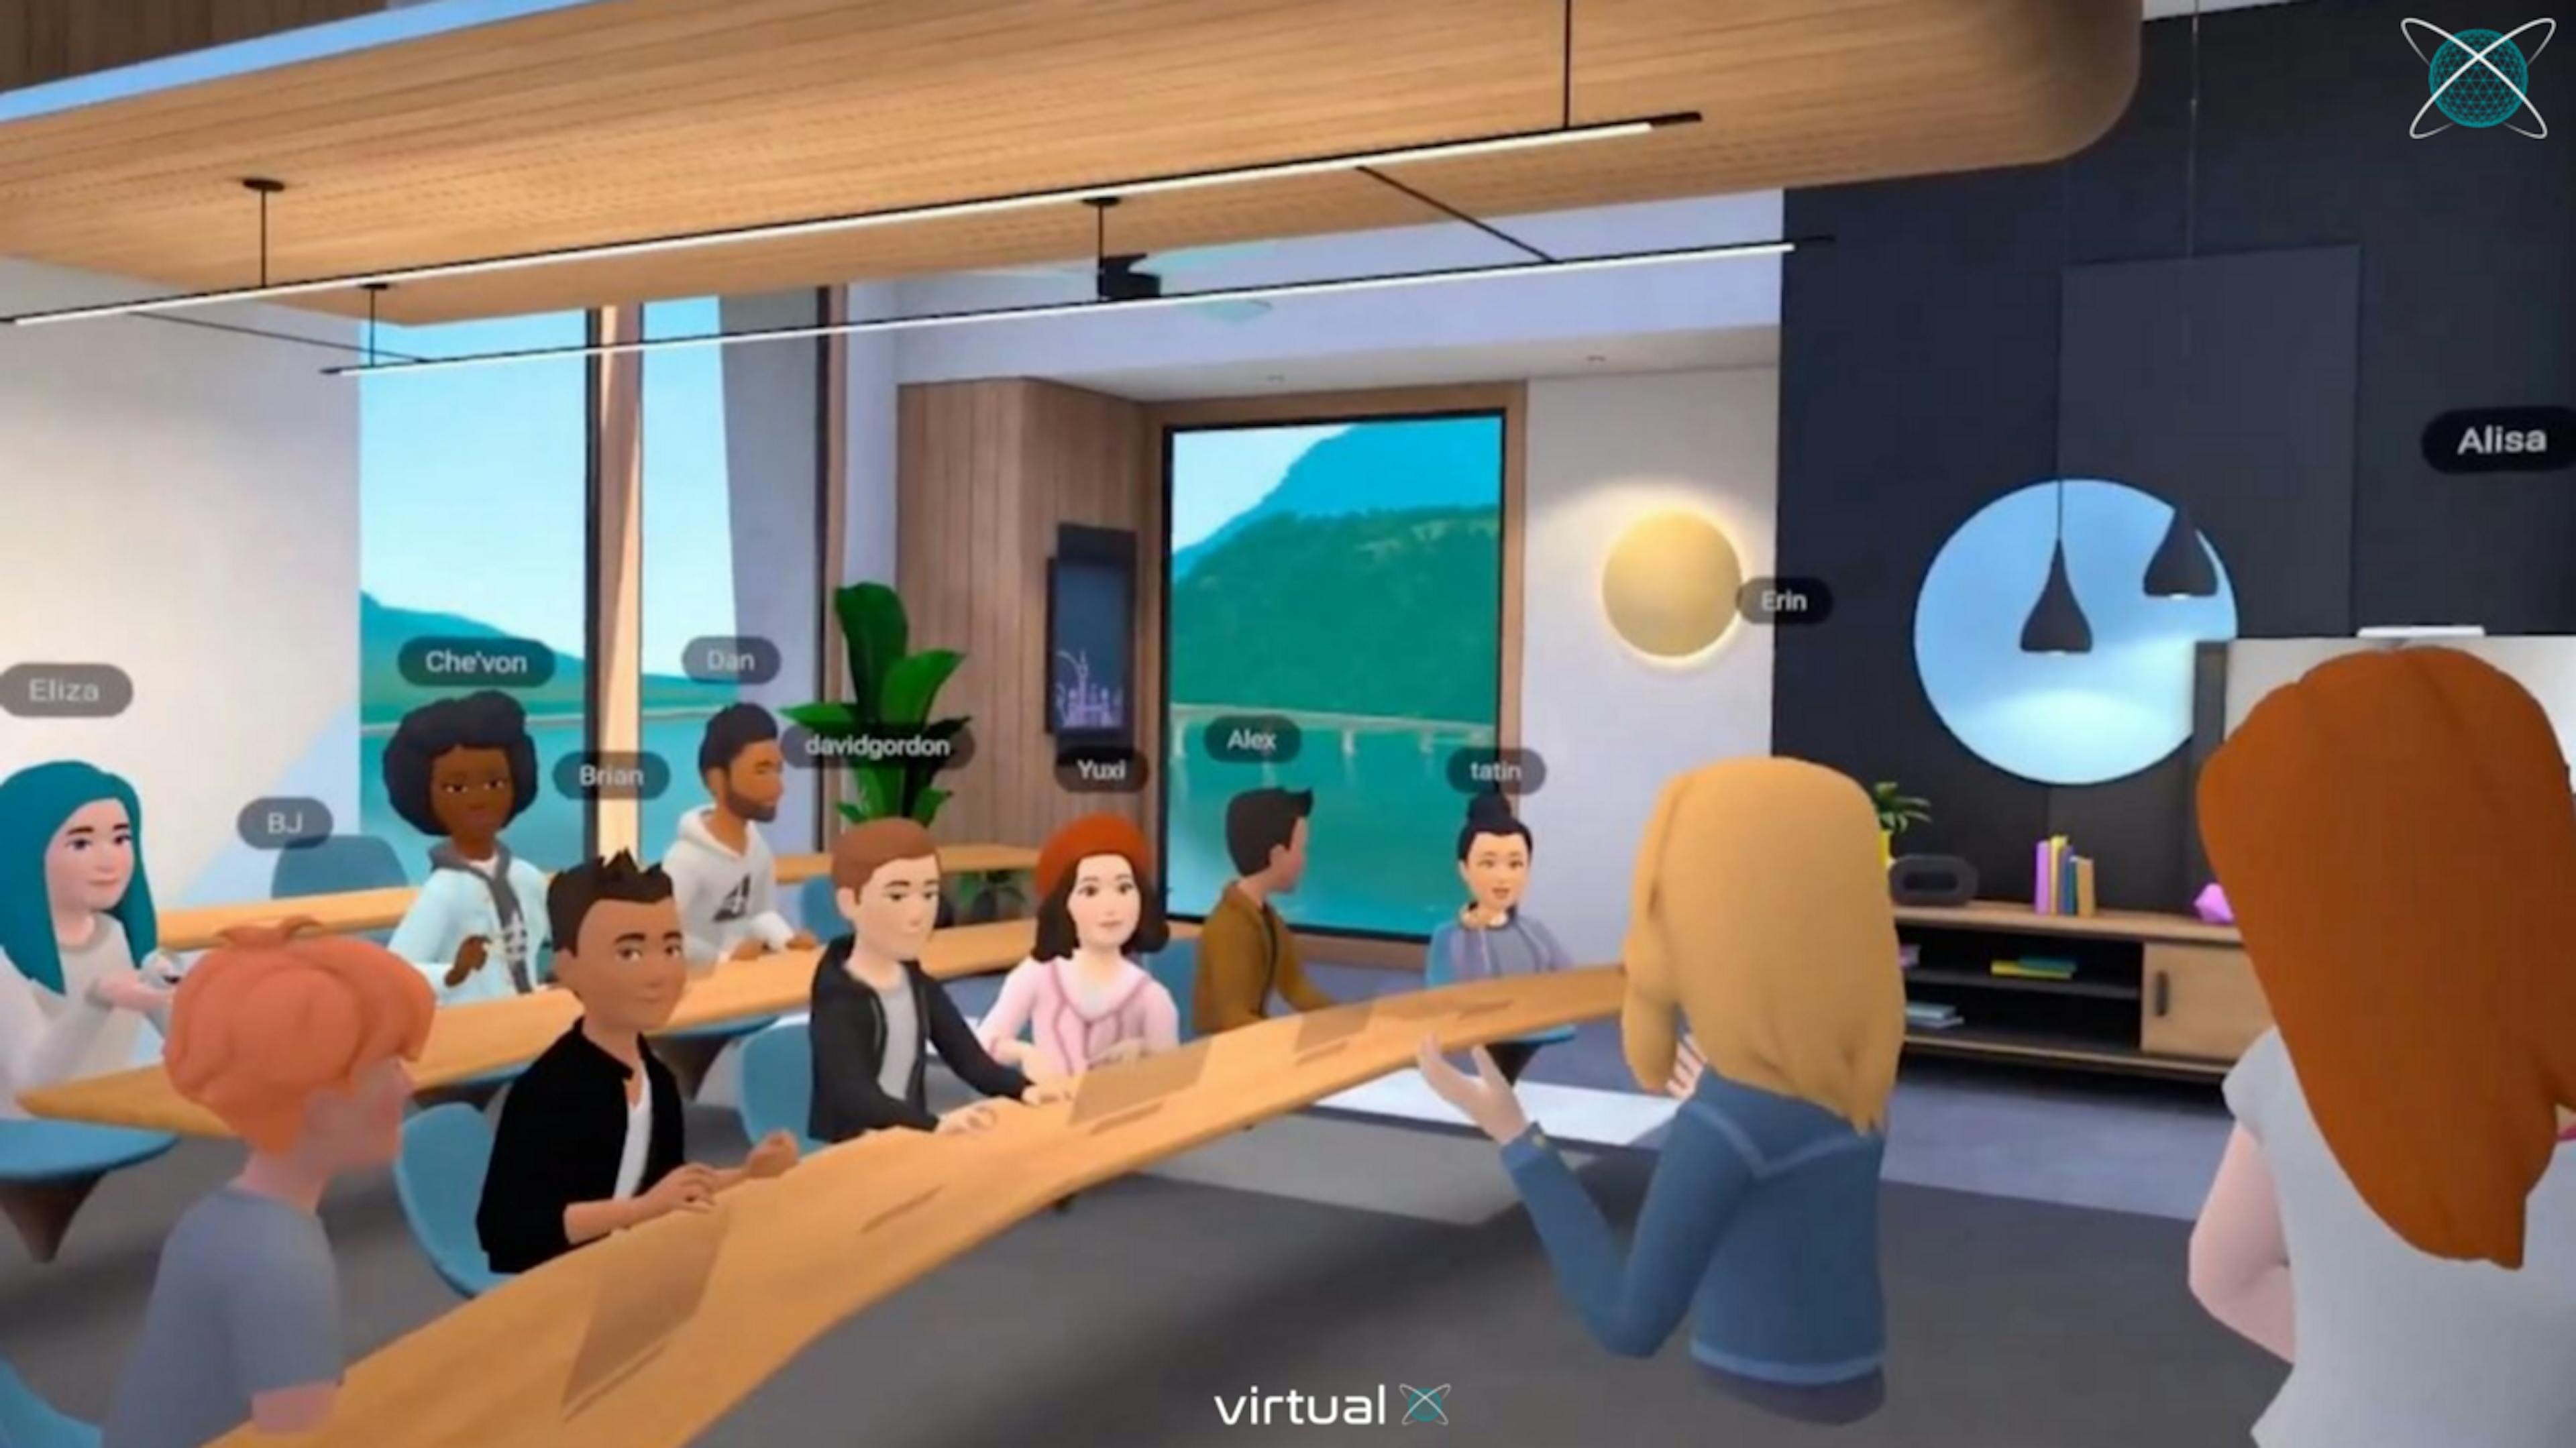 An online classroom in the Metaverse